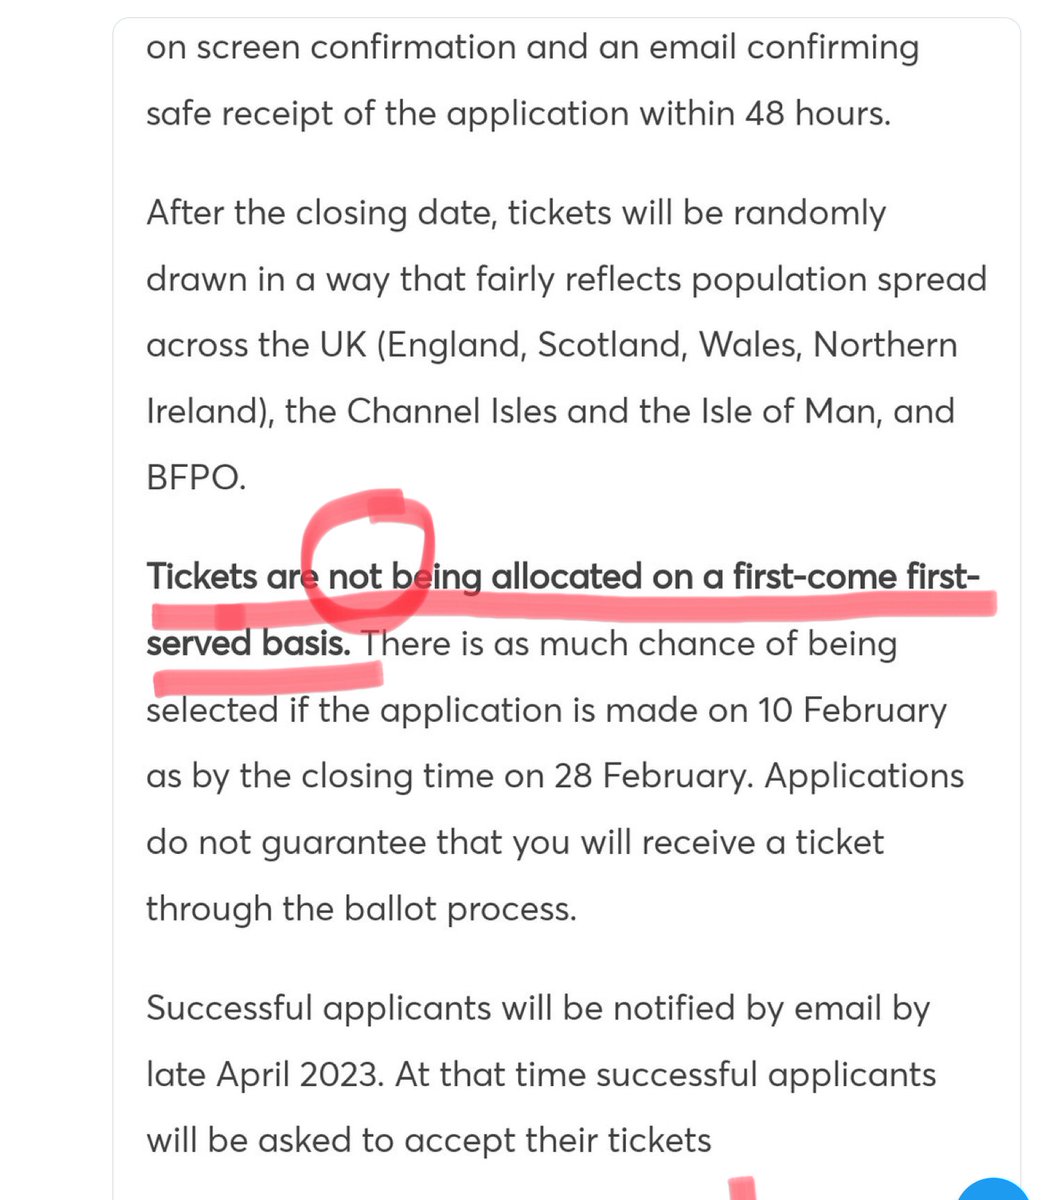 @Ticketmaster you clearly stated that the tickets Are NOT being allocated on a first come first serve basis. Yet when sent a congratulations email saying I’ve got 2 tickets, it says they’re now SOLD OUT. How is that? @tradingstandards @BBCNews #coronationconcert